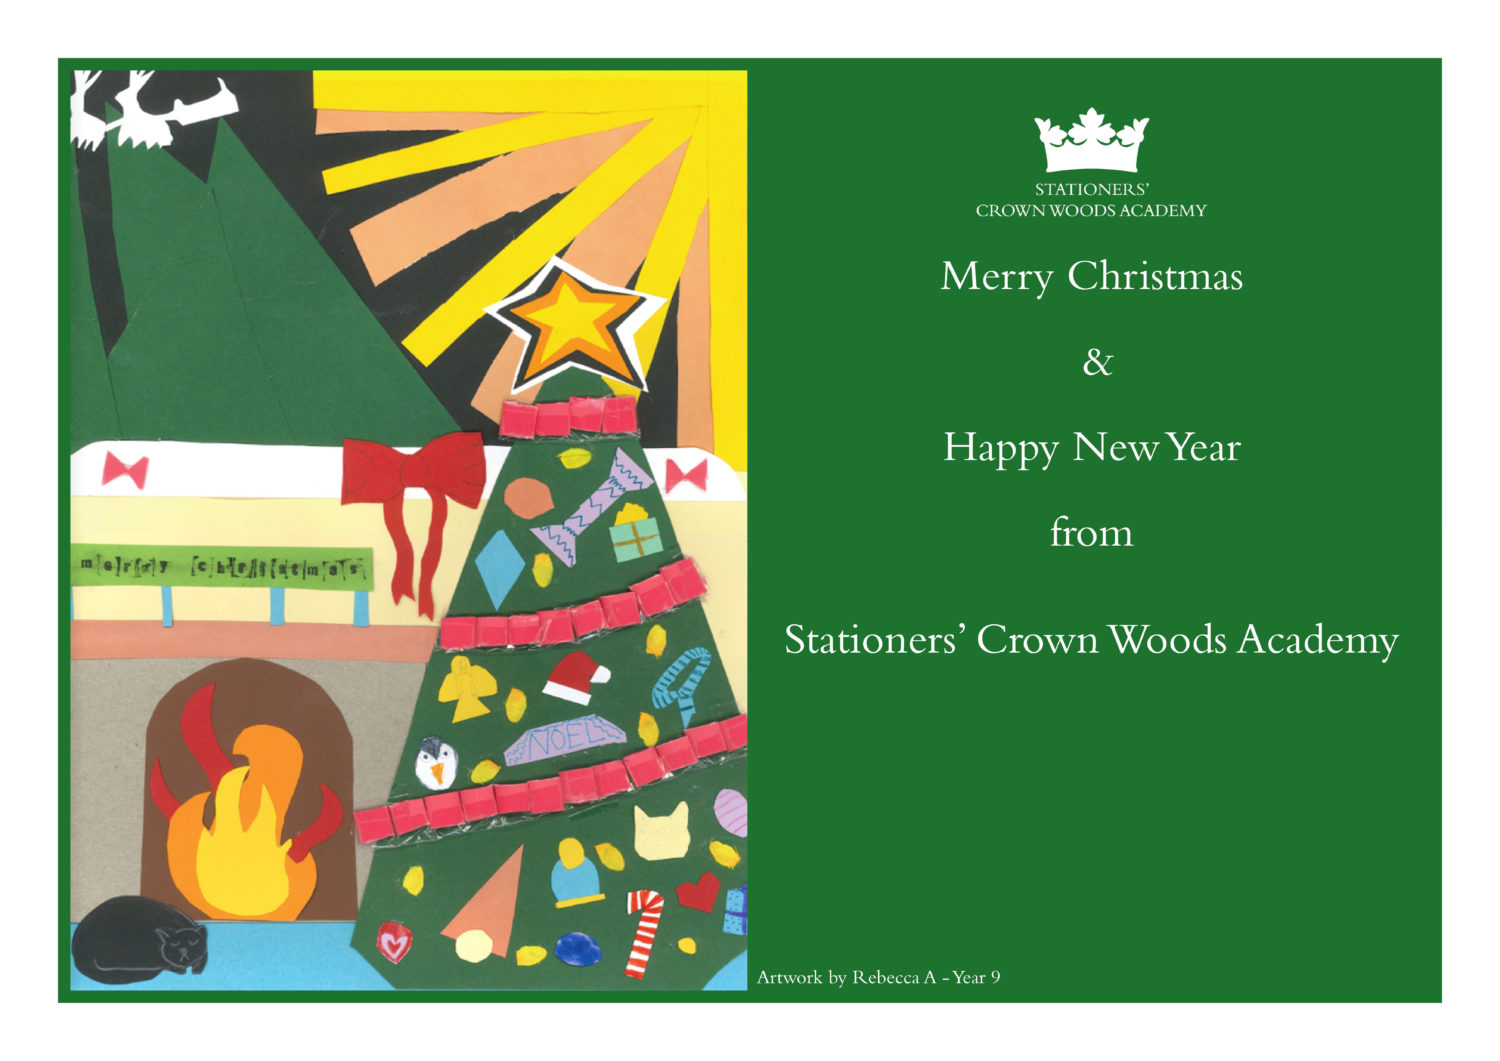 Merry Christmas & Happy New Year from Stationers' Crown Woods Academy.